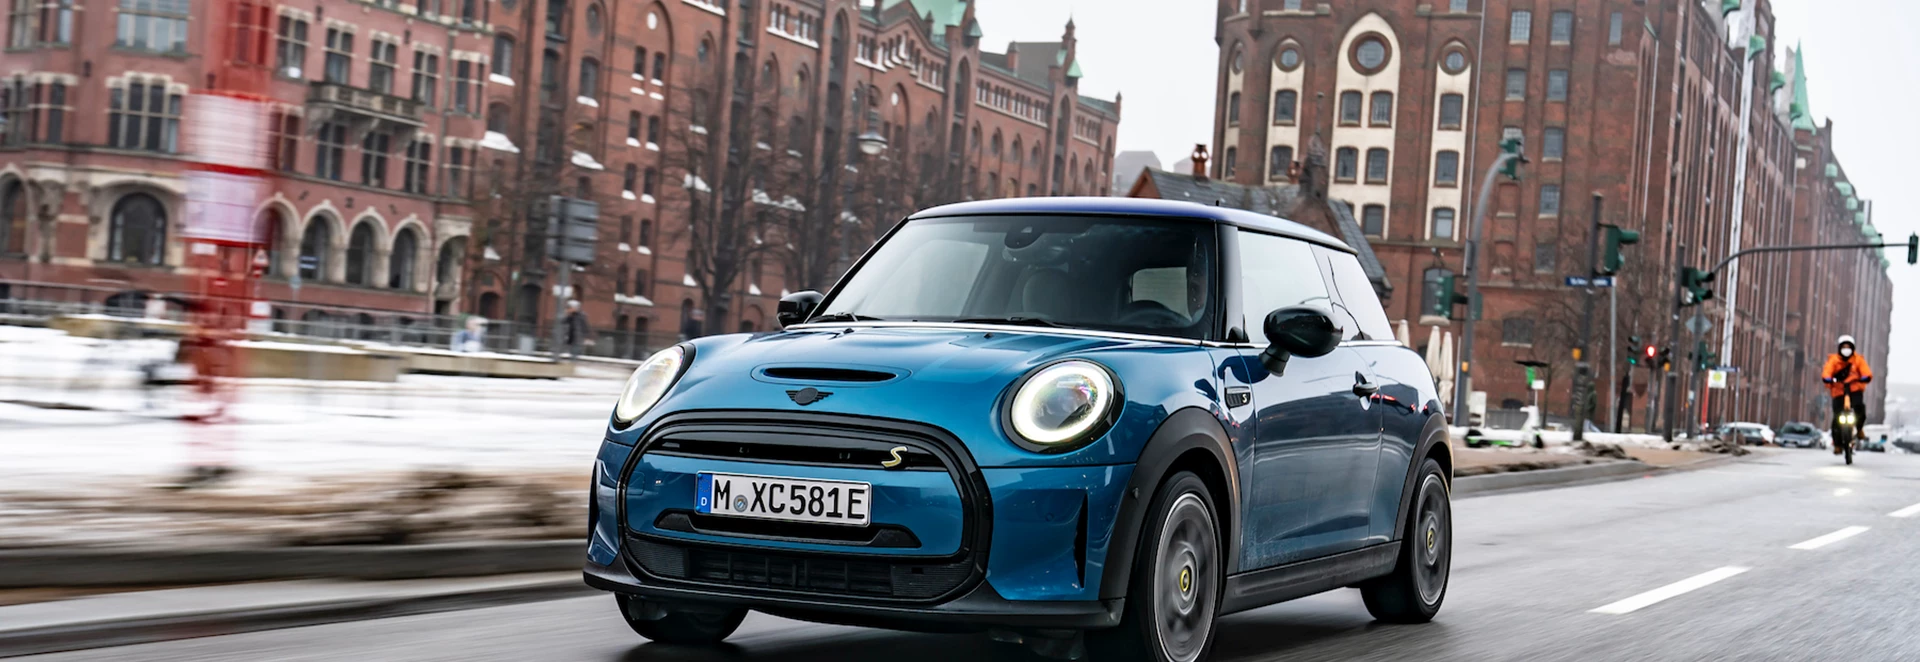 Mini to become fully electric brand by “early 2030s” 